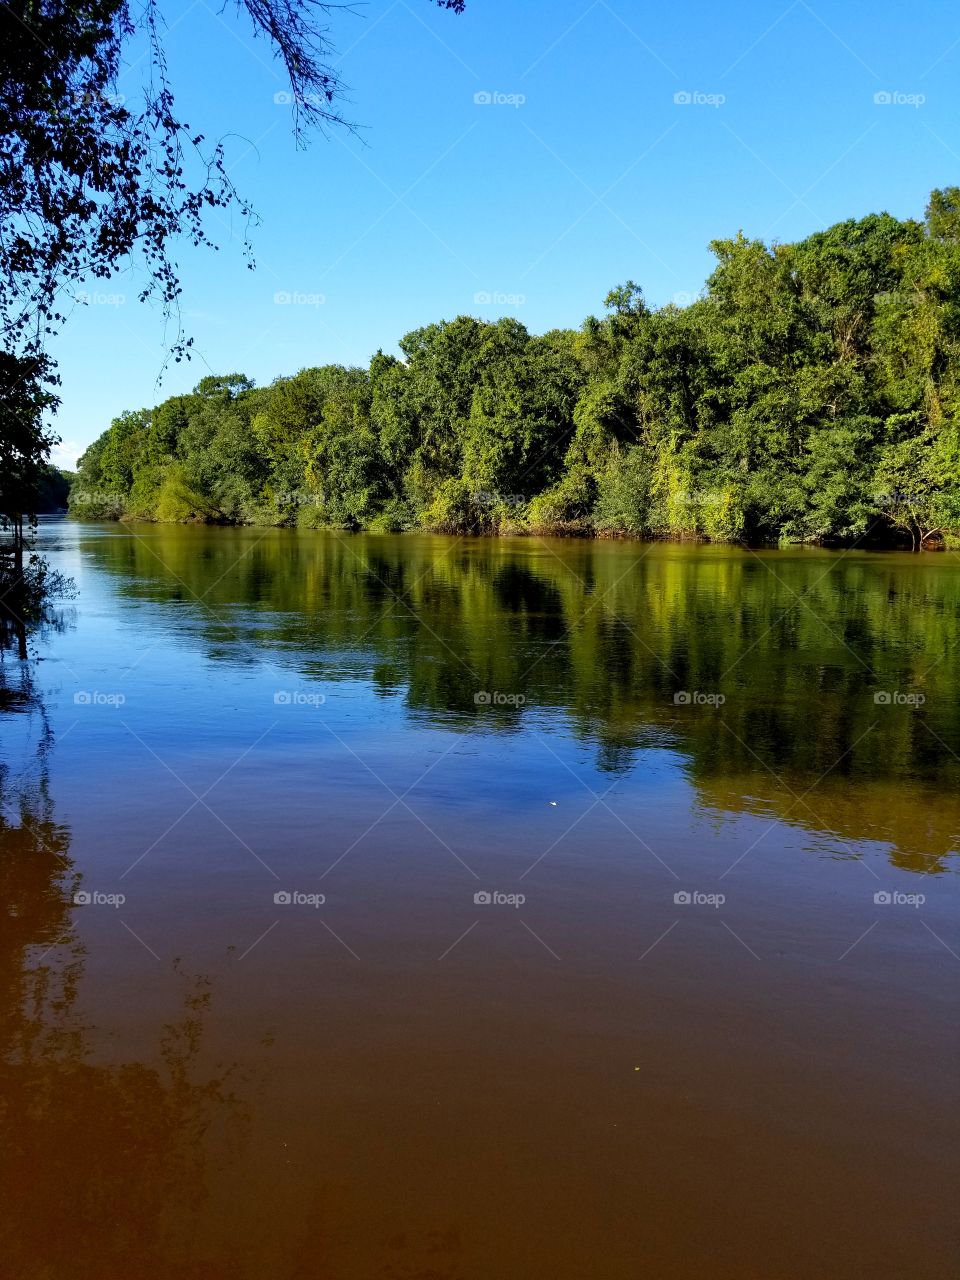 Chipola River,  beautiful reflection of the trees and sky on the river